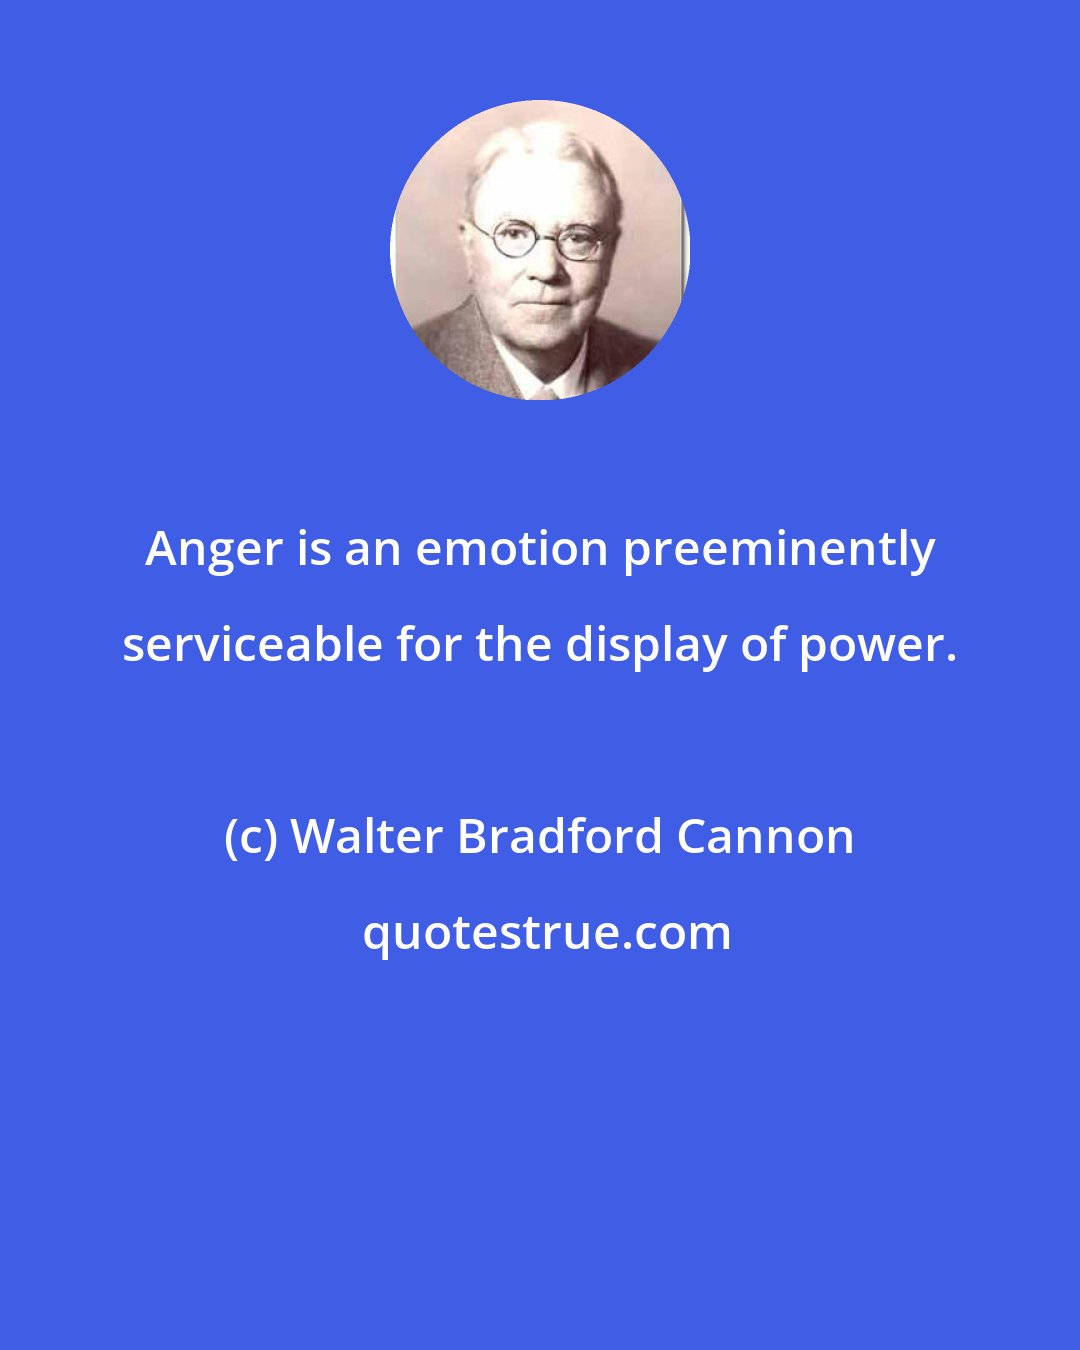 Walter Bradford Cannon: Anger is an emotion preeminently serviceable for the display of power.